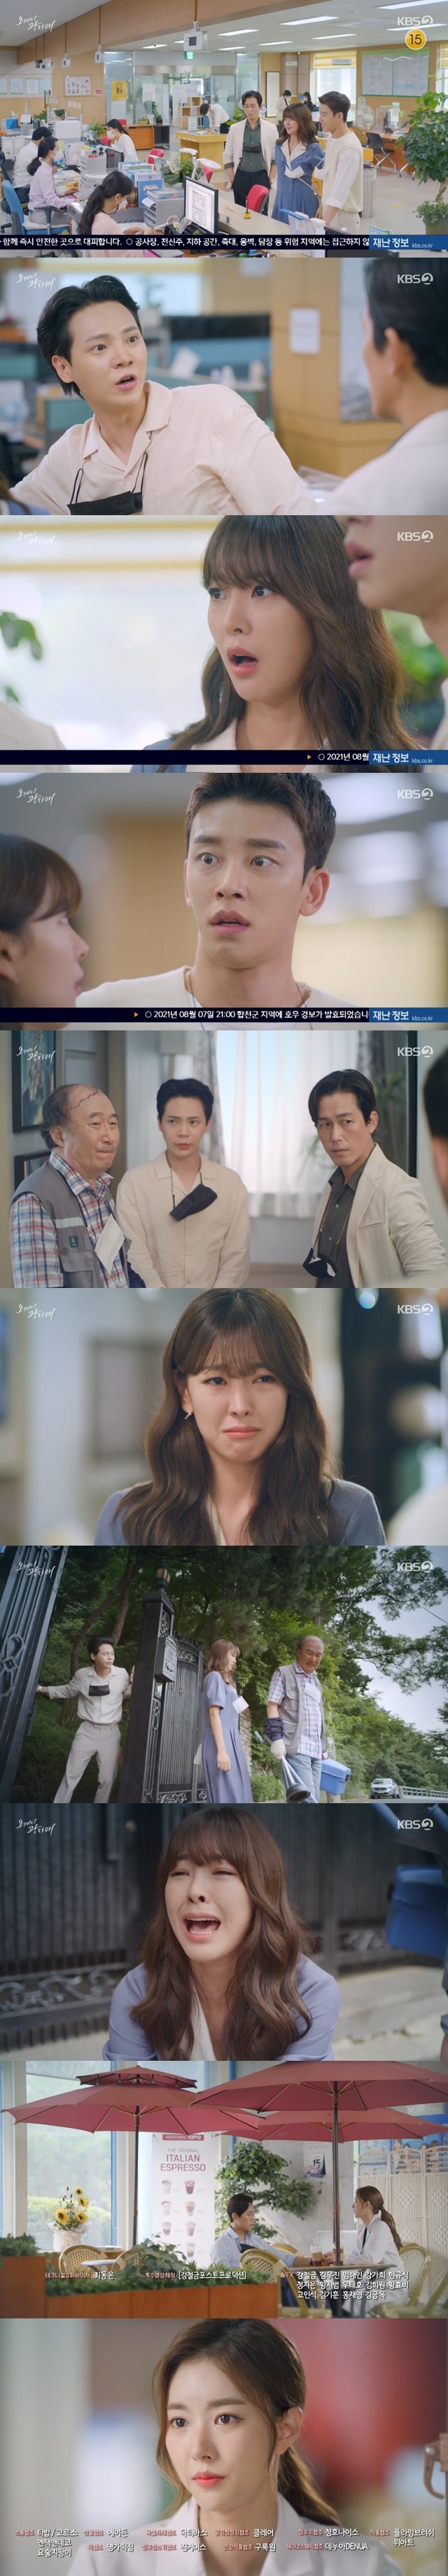 Ko Won-hee, who was Kaiji due to marriage, was Falled out of his in-laws after being kicked out of his in-laws by a false pregnancy field.Lee Kwang-tae (Ko Won-hee) was kicked out of his in-laws after being found pregnant before marriage in the 38th episode of KBS 2TVs weekend Drama OK Photo Sister (playplayed by Moon Young-nam/directed by Lee Jin-seo) broadcast on August 7.Lee Kwang-tae, who was married to Huh Gi-jin (Seok-hwan Seo), was allowed to marry a pre-marital pregnancy and became a Kaiji status as a landlords wife at a moment.Heo Pung-jin gave Lee Kwang-tae a credit card and left Lee Kwang-tae to spend money on the fact that he had a nephew.In the meantime, Lee Kwang-tae invited Taraxacum platycarpum (Han Ji-wan) to his house for the sake of his poetry.Heo Pung-jin was in a situation where he opposed himself in the family of Dr. Taraxacum platycarpum.As soon as he saw Taraxacum platycarpum, he shouted, Go out! And Taraxacum platycarpum shed tears.Lee Kwang-tae said to such a bluff, Is it a man who rings a woman who loves you?That night, he drank alone and the next day he went to Taraxacum platycarpum and said, Im sorry, I thought it was for you to cut it off.I thought it was for you to think for yourself, because I had no love experience and no one to teach.I am now conscious, he confessed, saying that he was awakened by Lee Kwang-tae.Then, Huh Pung-jin said, I will change what your parents will like.When asked, Can you wait for me, Taraxacum platycarpum?, Taraxacum platycarpum nodded, and Huh Pung-jin decided to push ahead with the establishment of the foundation that Lee Kwang-tae proposed to be a suitable person for Taraxacum platycarpum.With him, Huh Pung Jin hastened his brother Hu Gi Jin and Lee Kwang Taes Marriage report.So, I went to the ward office with Lee Kwang-tae, who was hungry, and I knew that Lee Kwang-tae went to the gymnasium where Lee Kwang-tae was attending a few days ago and did not get pregnant.Byun Sa-chae went straight to the district office to block the Marriage report and revealed Lee Kwang-taes fake pregnancy.Heo Pung-jin was angry and found his son-in-law, Lee Chul-soo (Yoon Joo-sang), and Lee Cheol-soo was finally asked by his daughter Lee Kwang-tae to break through the toilet and witnessed all the situations.Heo Pung-jin said, Take your daughter. When Lee tried to persuade her that she had married, she said, That was a marriage condition. This is a fraudulent marriage.Heo Pung-jin even threw Lee Cheol-su and Lee Kwang-tae out.